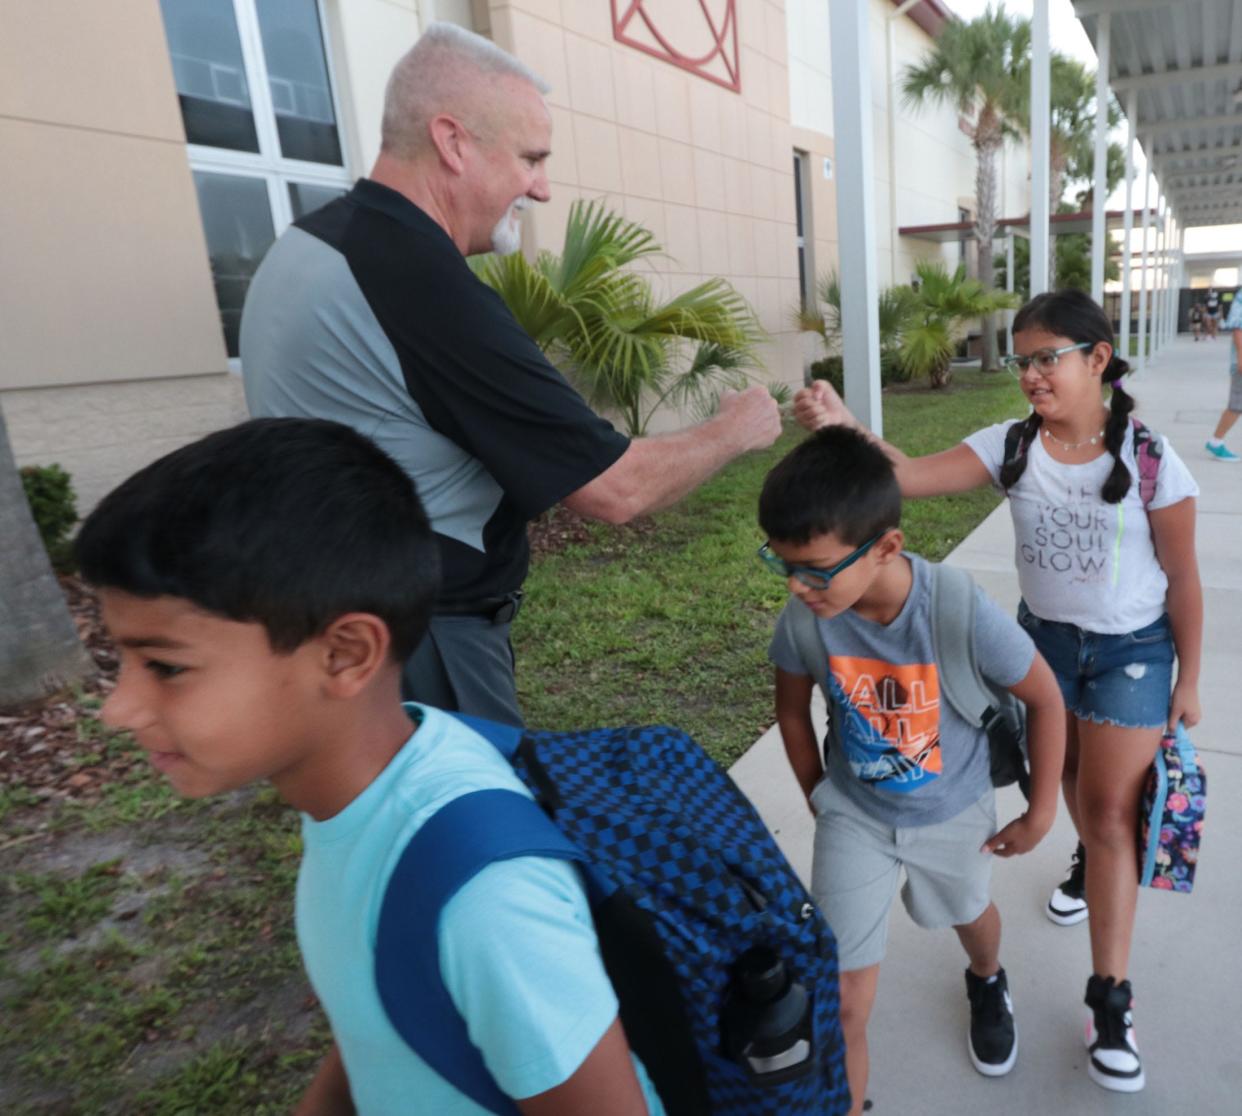 Wadsworth Elementary School Principal Paul Peacock fist bumps a group of students heading to class, Wednesday, Aug. 10, 2022, as Flagler County students return on the first day of school.